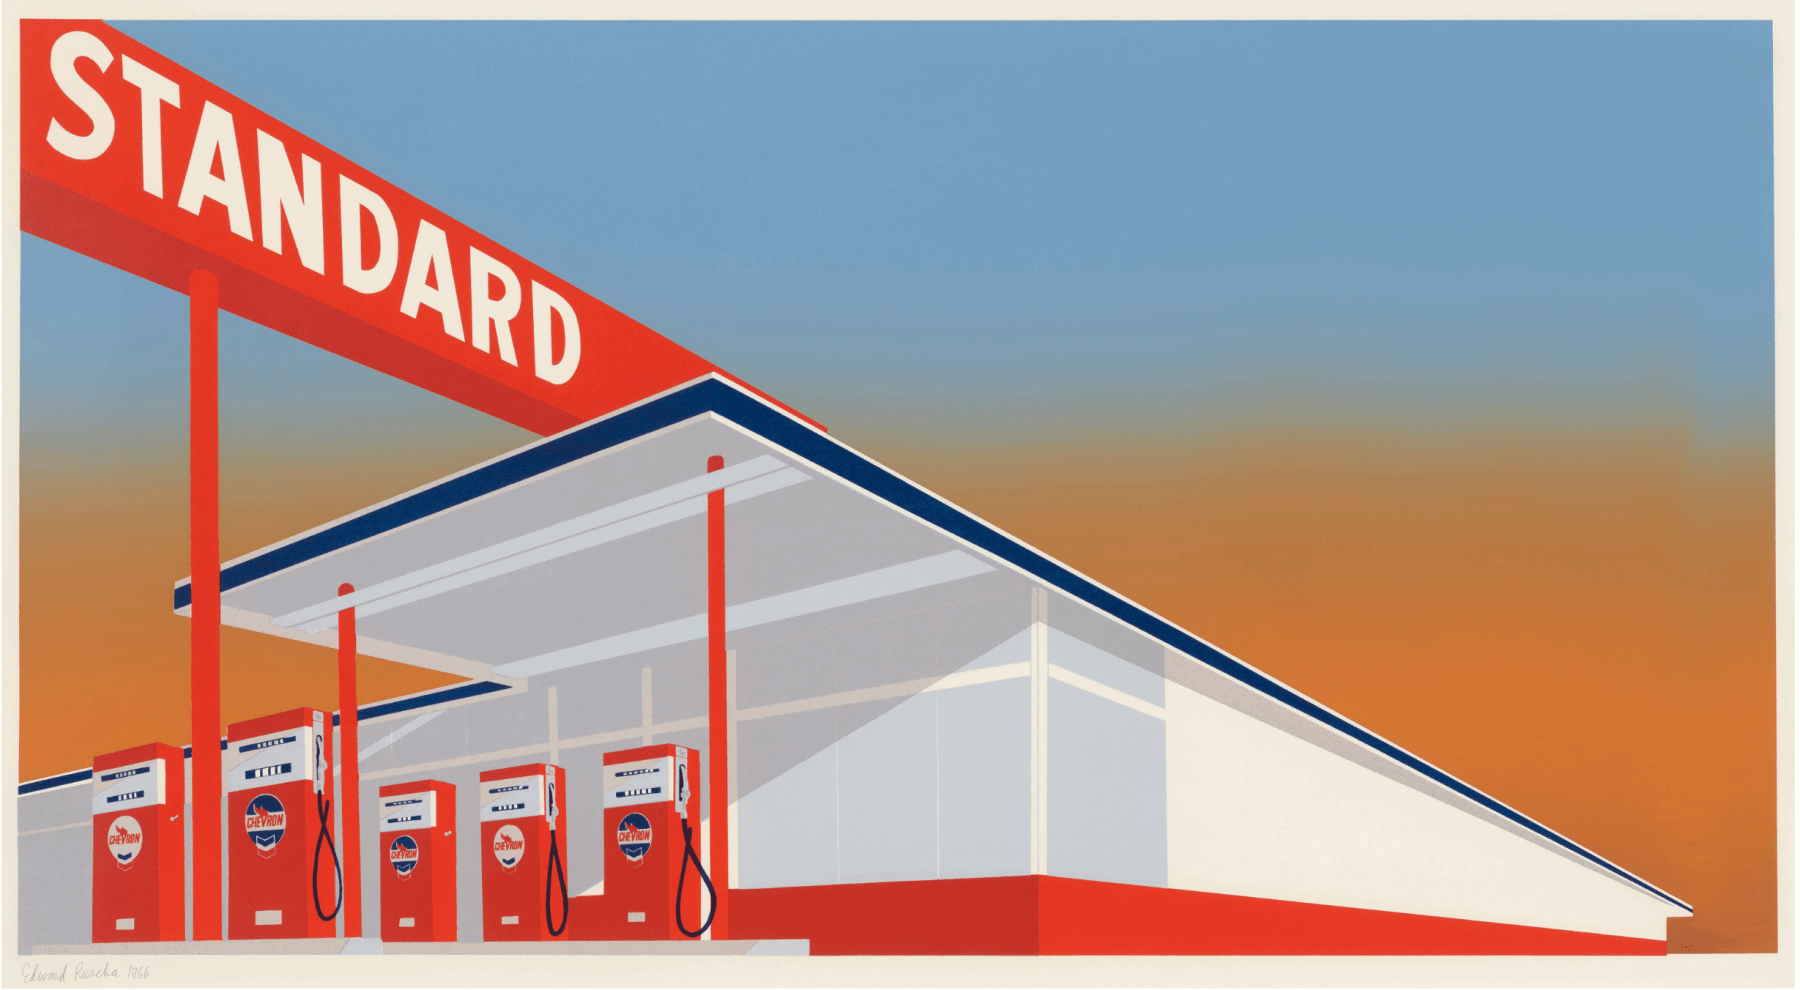 Ed Ruscha&amp;nbsp;(b. 1937)

Standard Station,&amp;nbsp;1966

Color screenprint on commercial buff paper

25 5/8 x 40 inches

Edition of 50